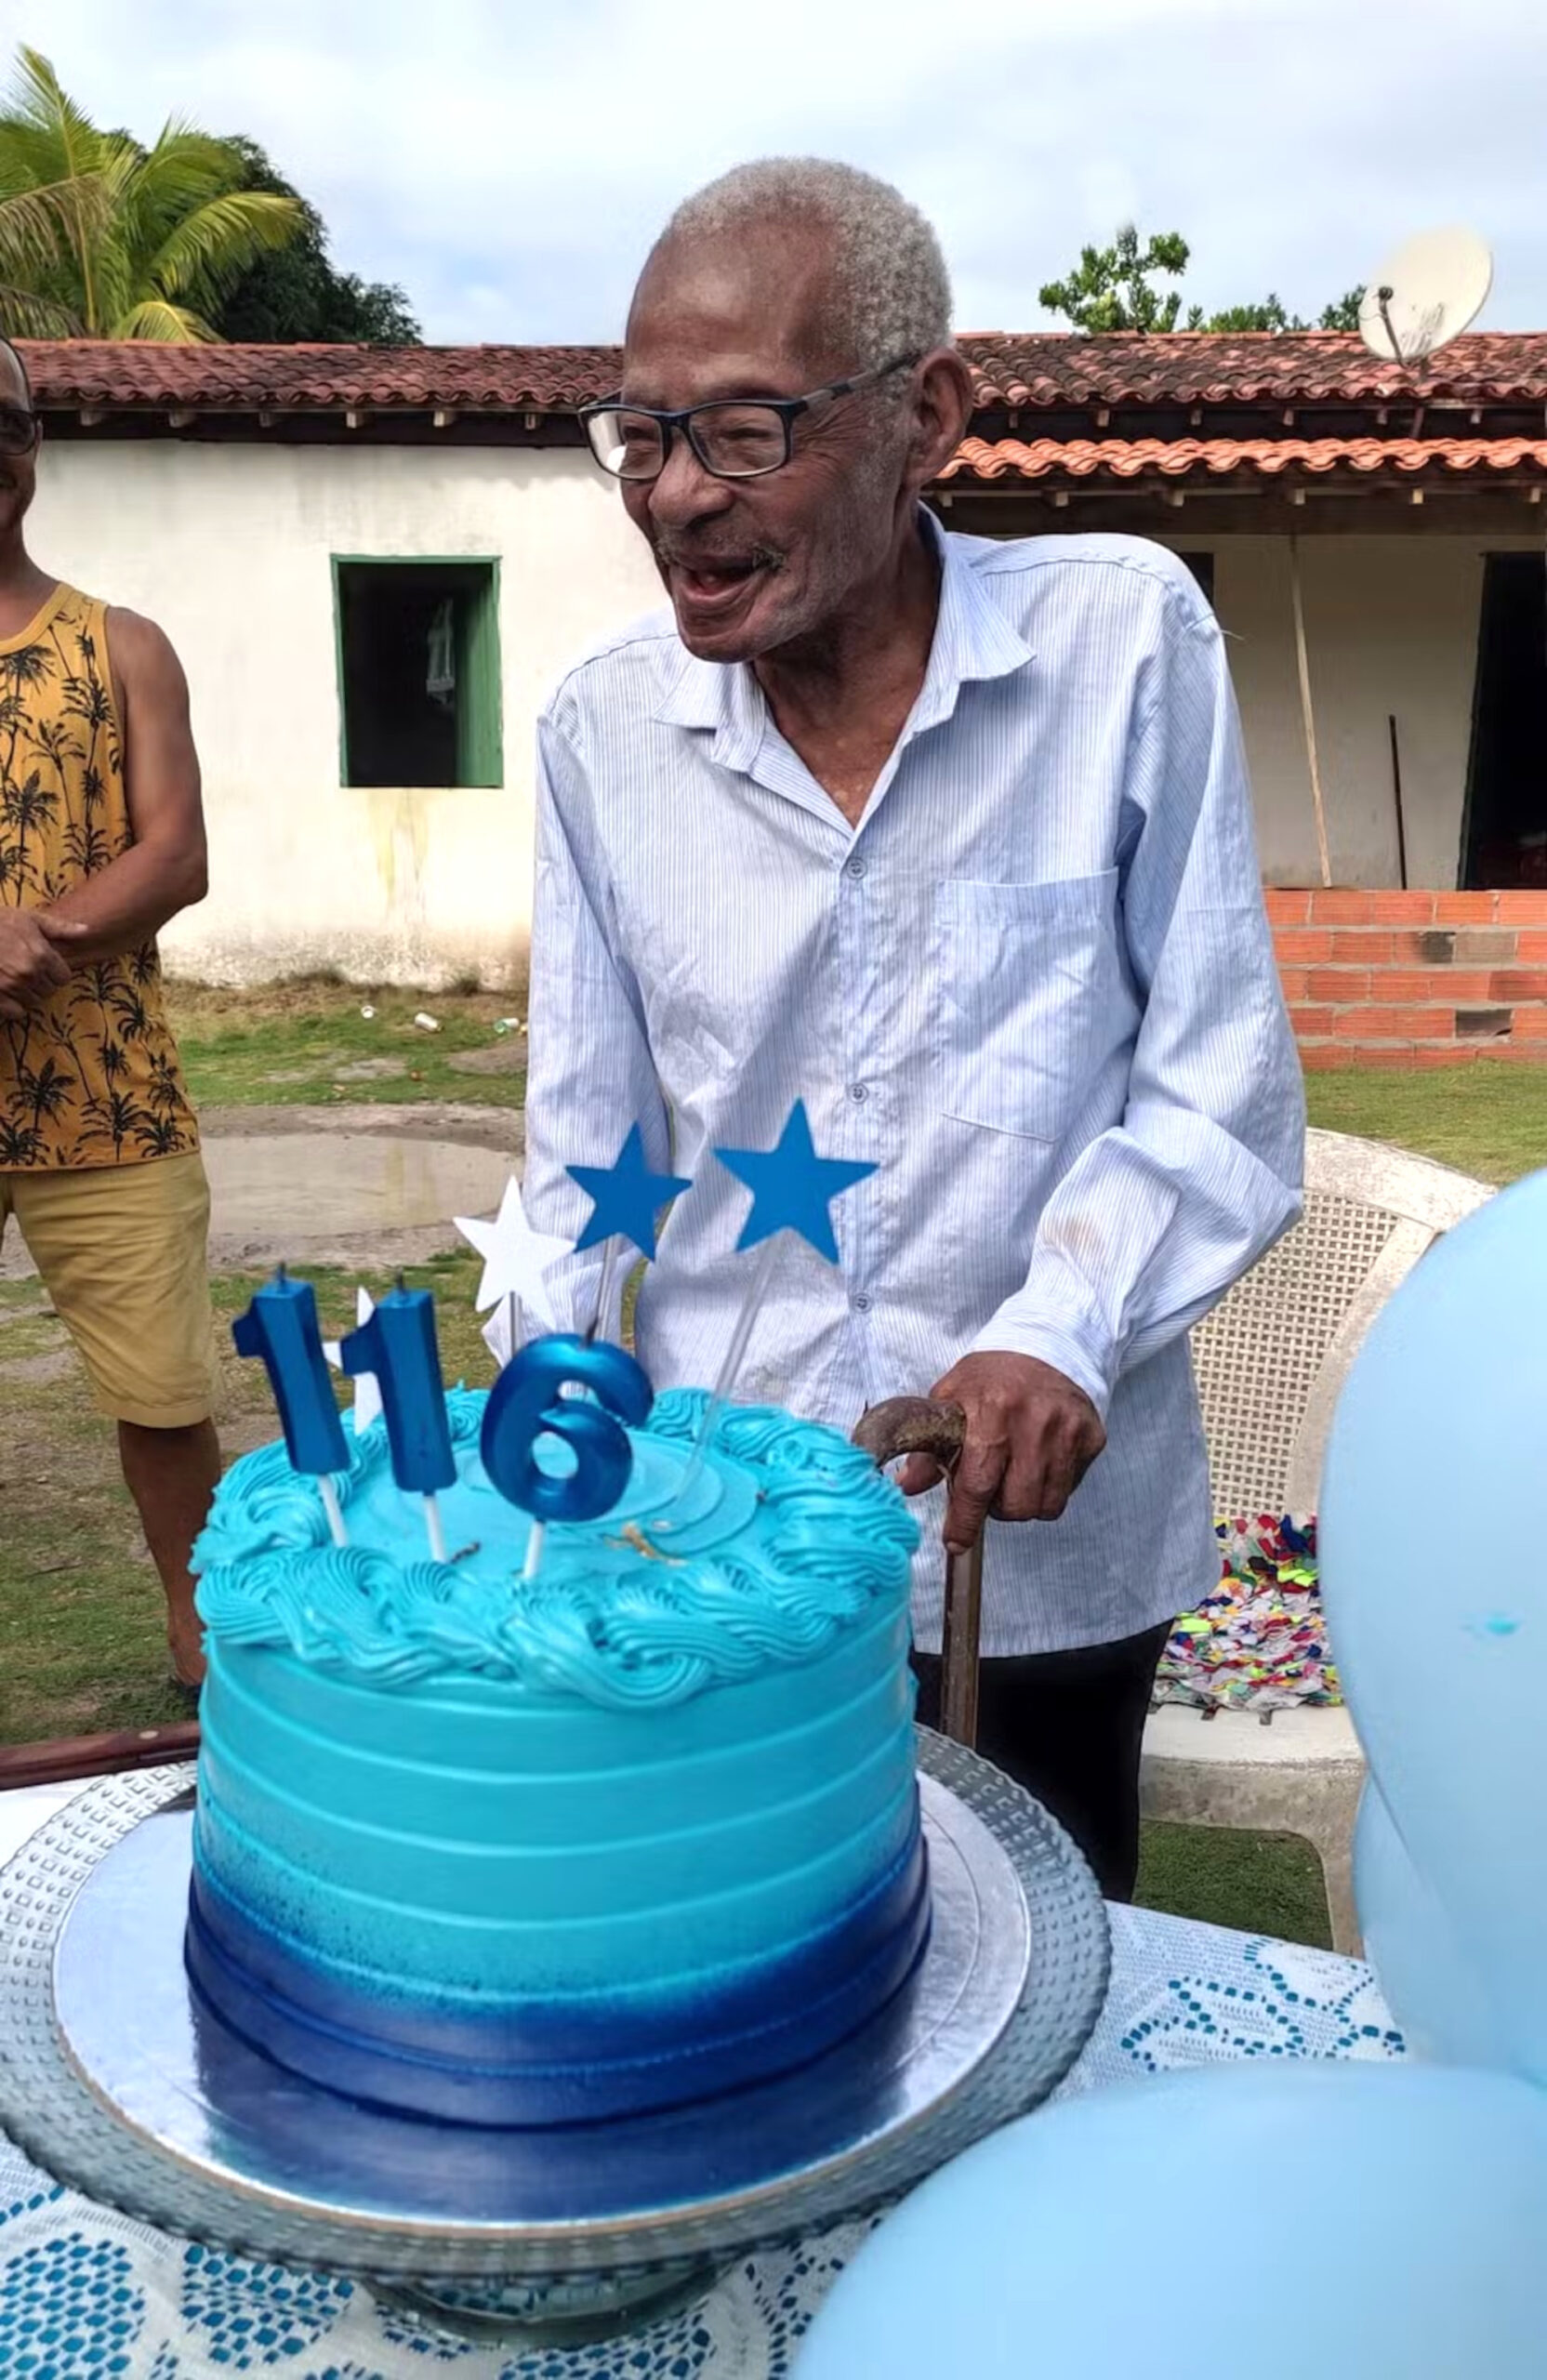 Read more about the article  Party Lover Who Celebrated 116th Birthday Set To Become Oldest Man Ever